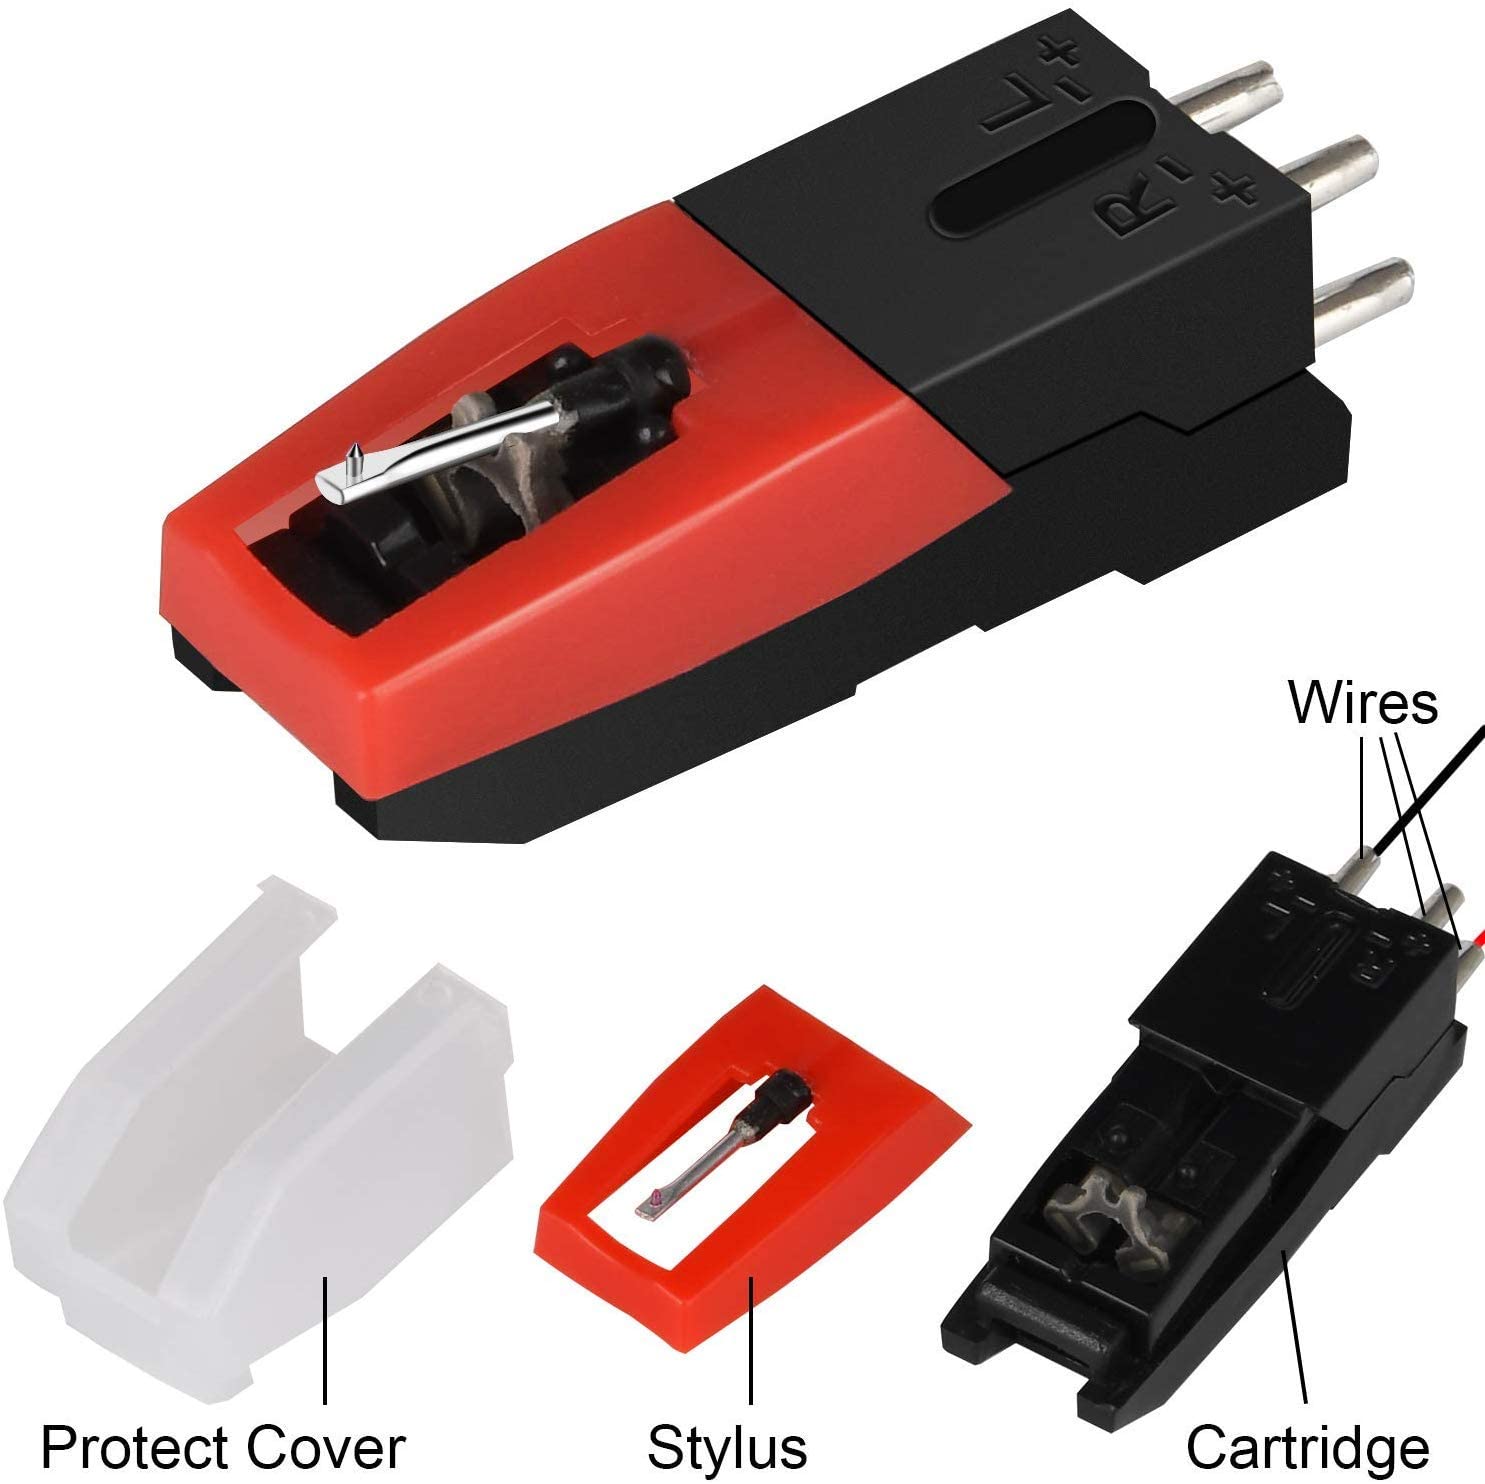 DIGITNOW! Vinyl Turntable Cartridge with Needle Stylus for Vintage LP for Record Player - 3 Pack